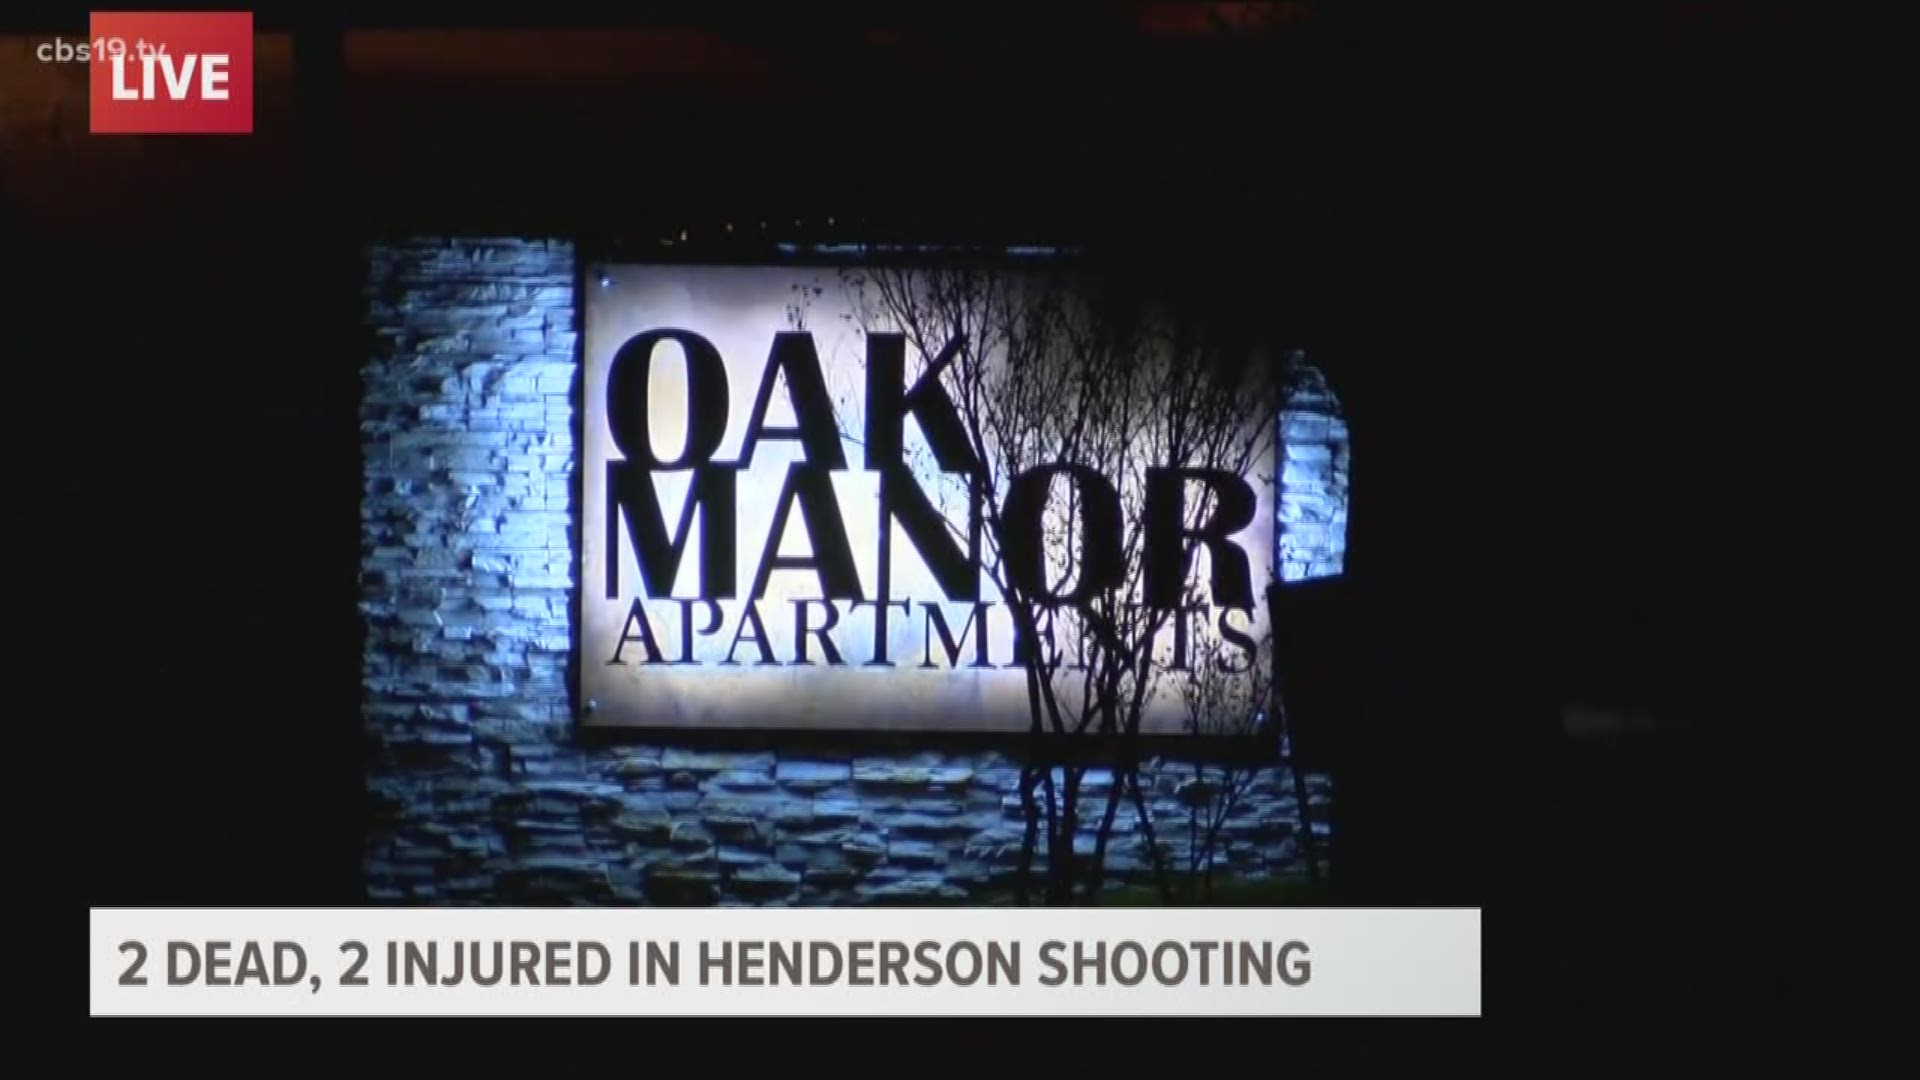 Four people were shot at the Oak Manor Apartments in Henderson Sunday night. Police say a suspect was arrested in Louisiana.